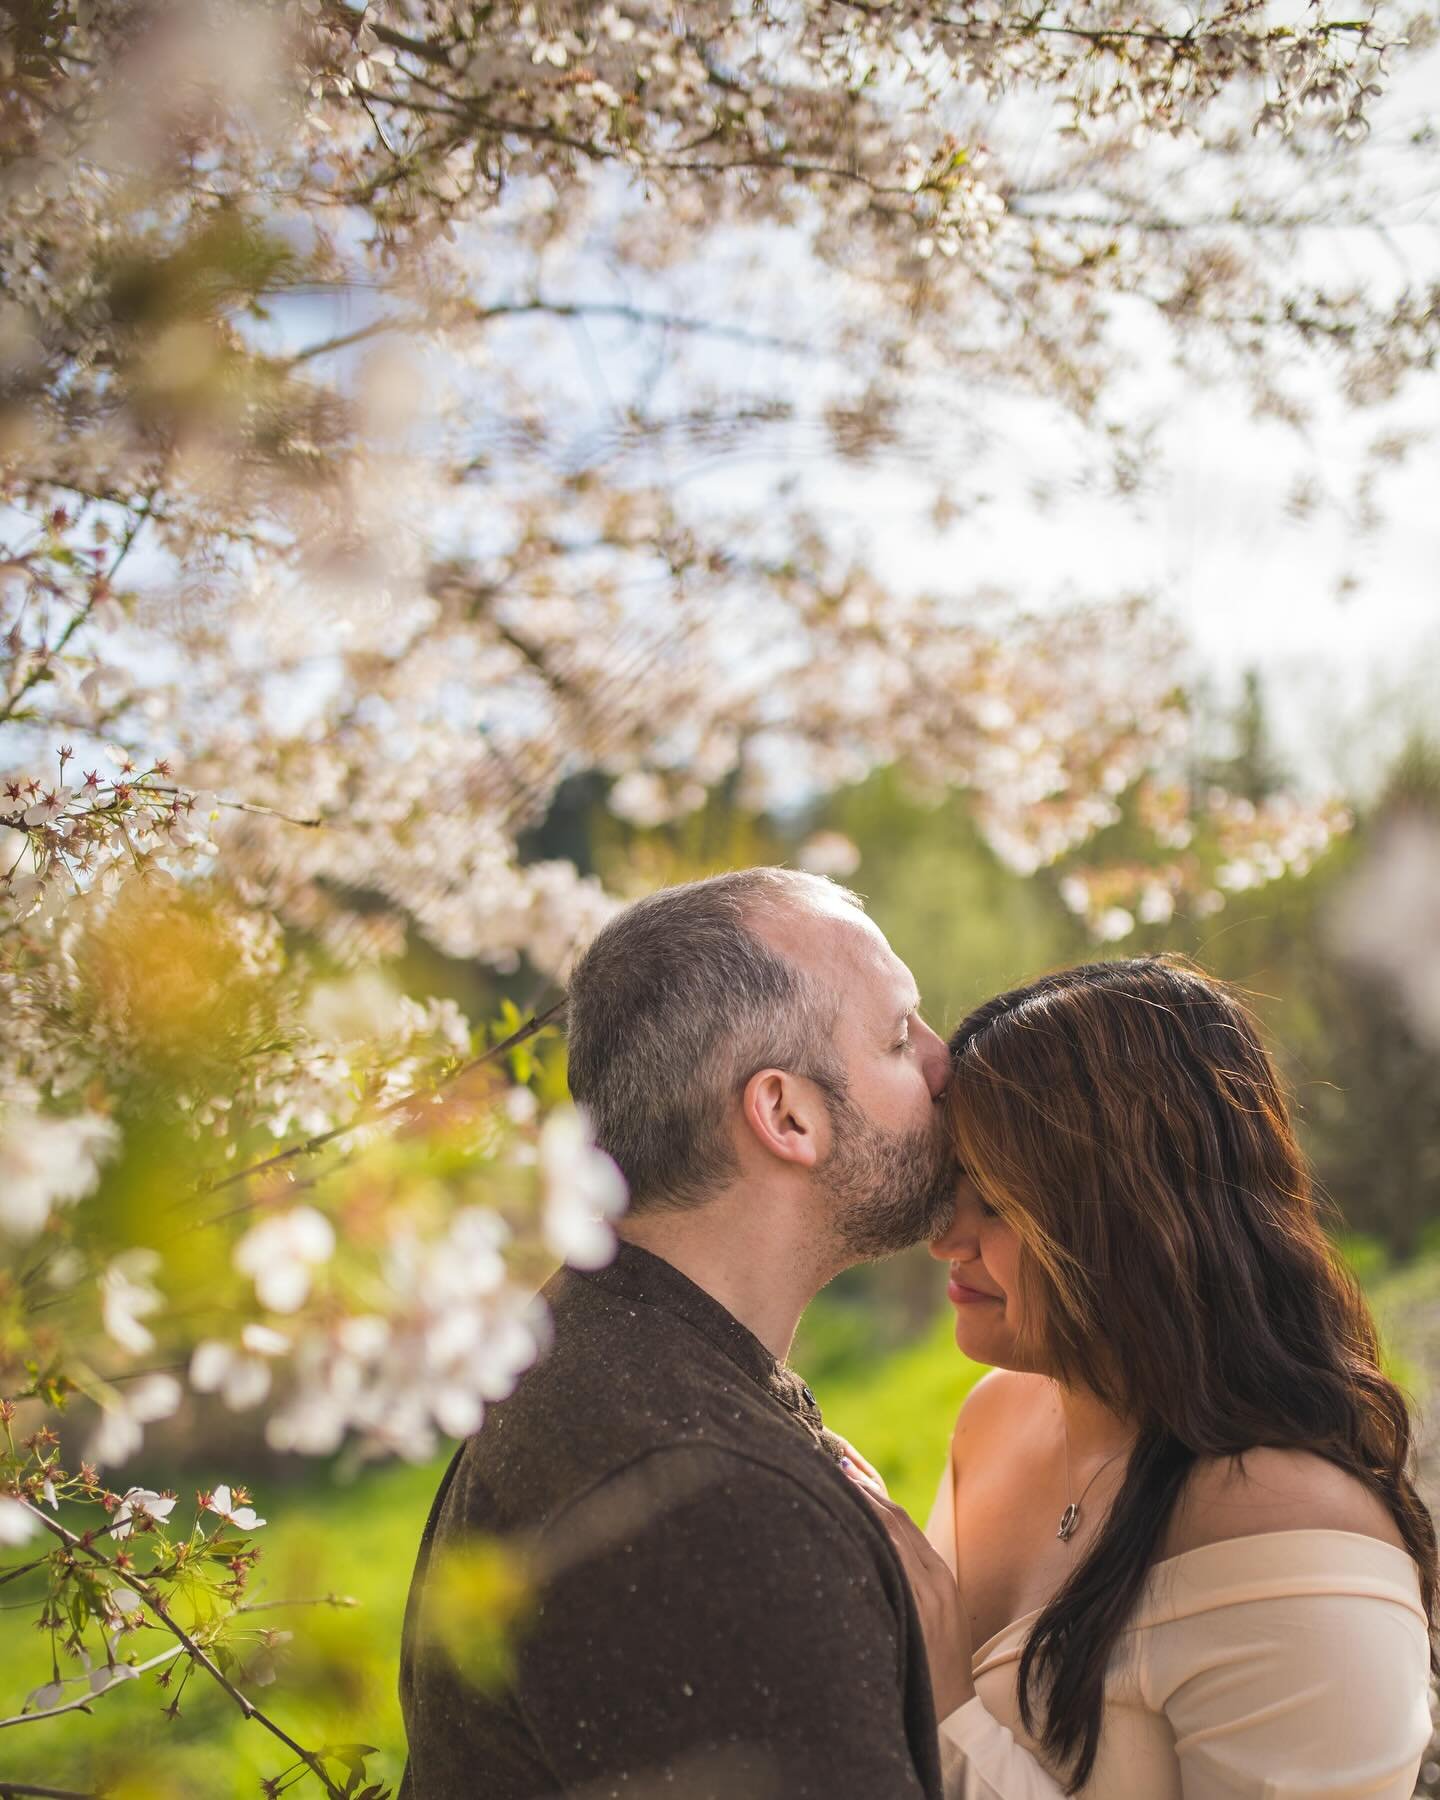 Cherry Blossoms. That&rsquo;s what we talked about when we first planned this Maternity Session.

The timing was looking just right, and although I think all 3 of us would rather go Sakura hunting in Japan - an unassuming but beautiful park just outs